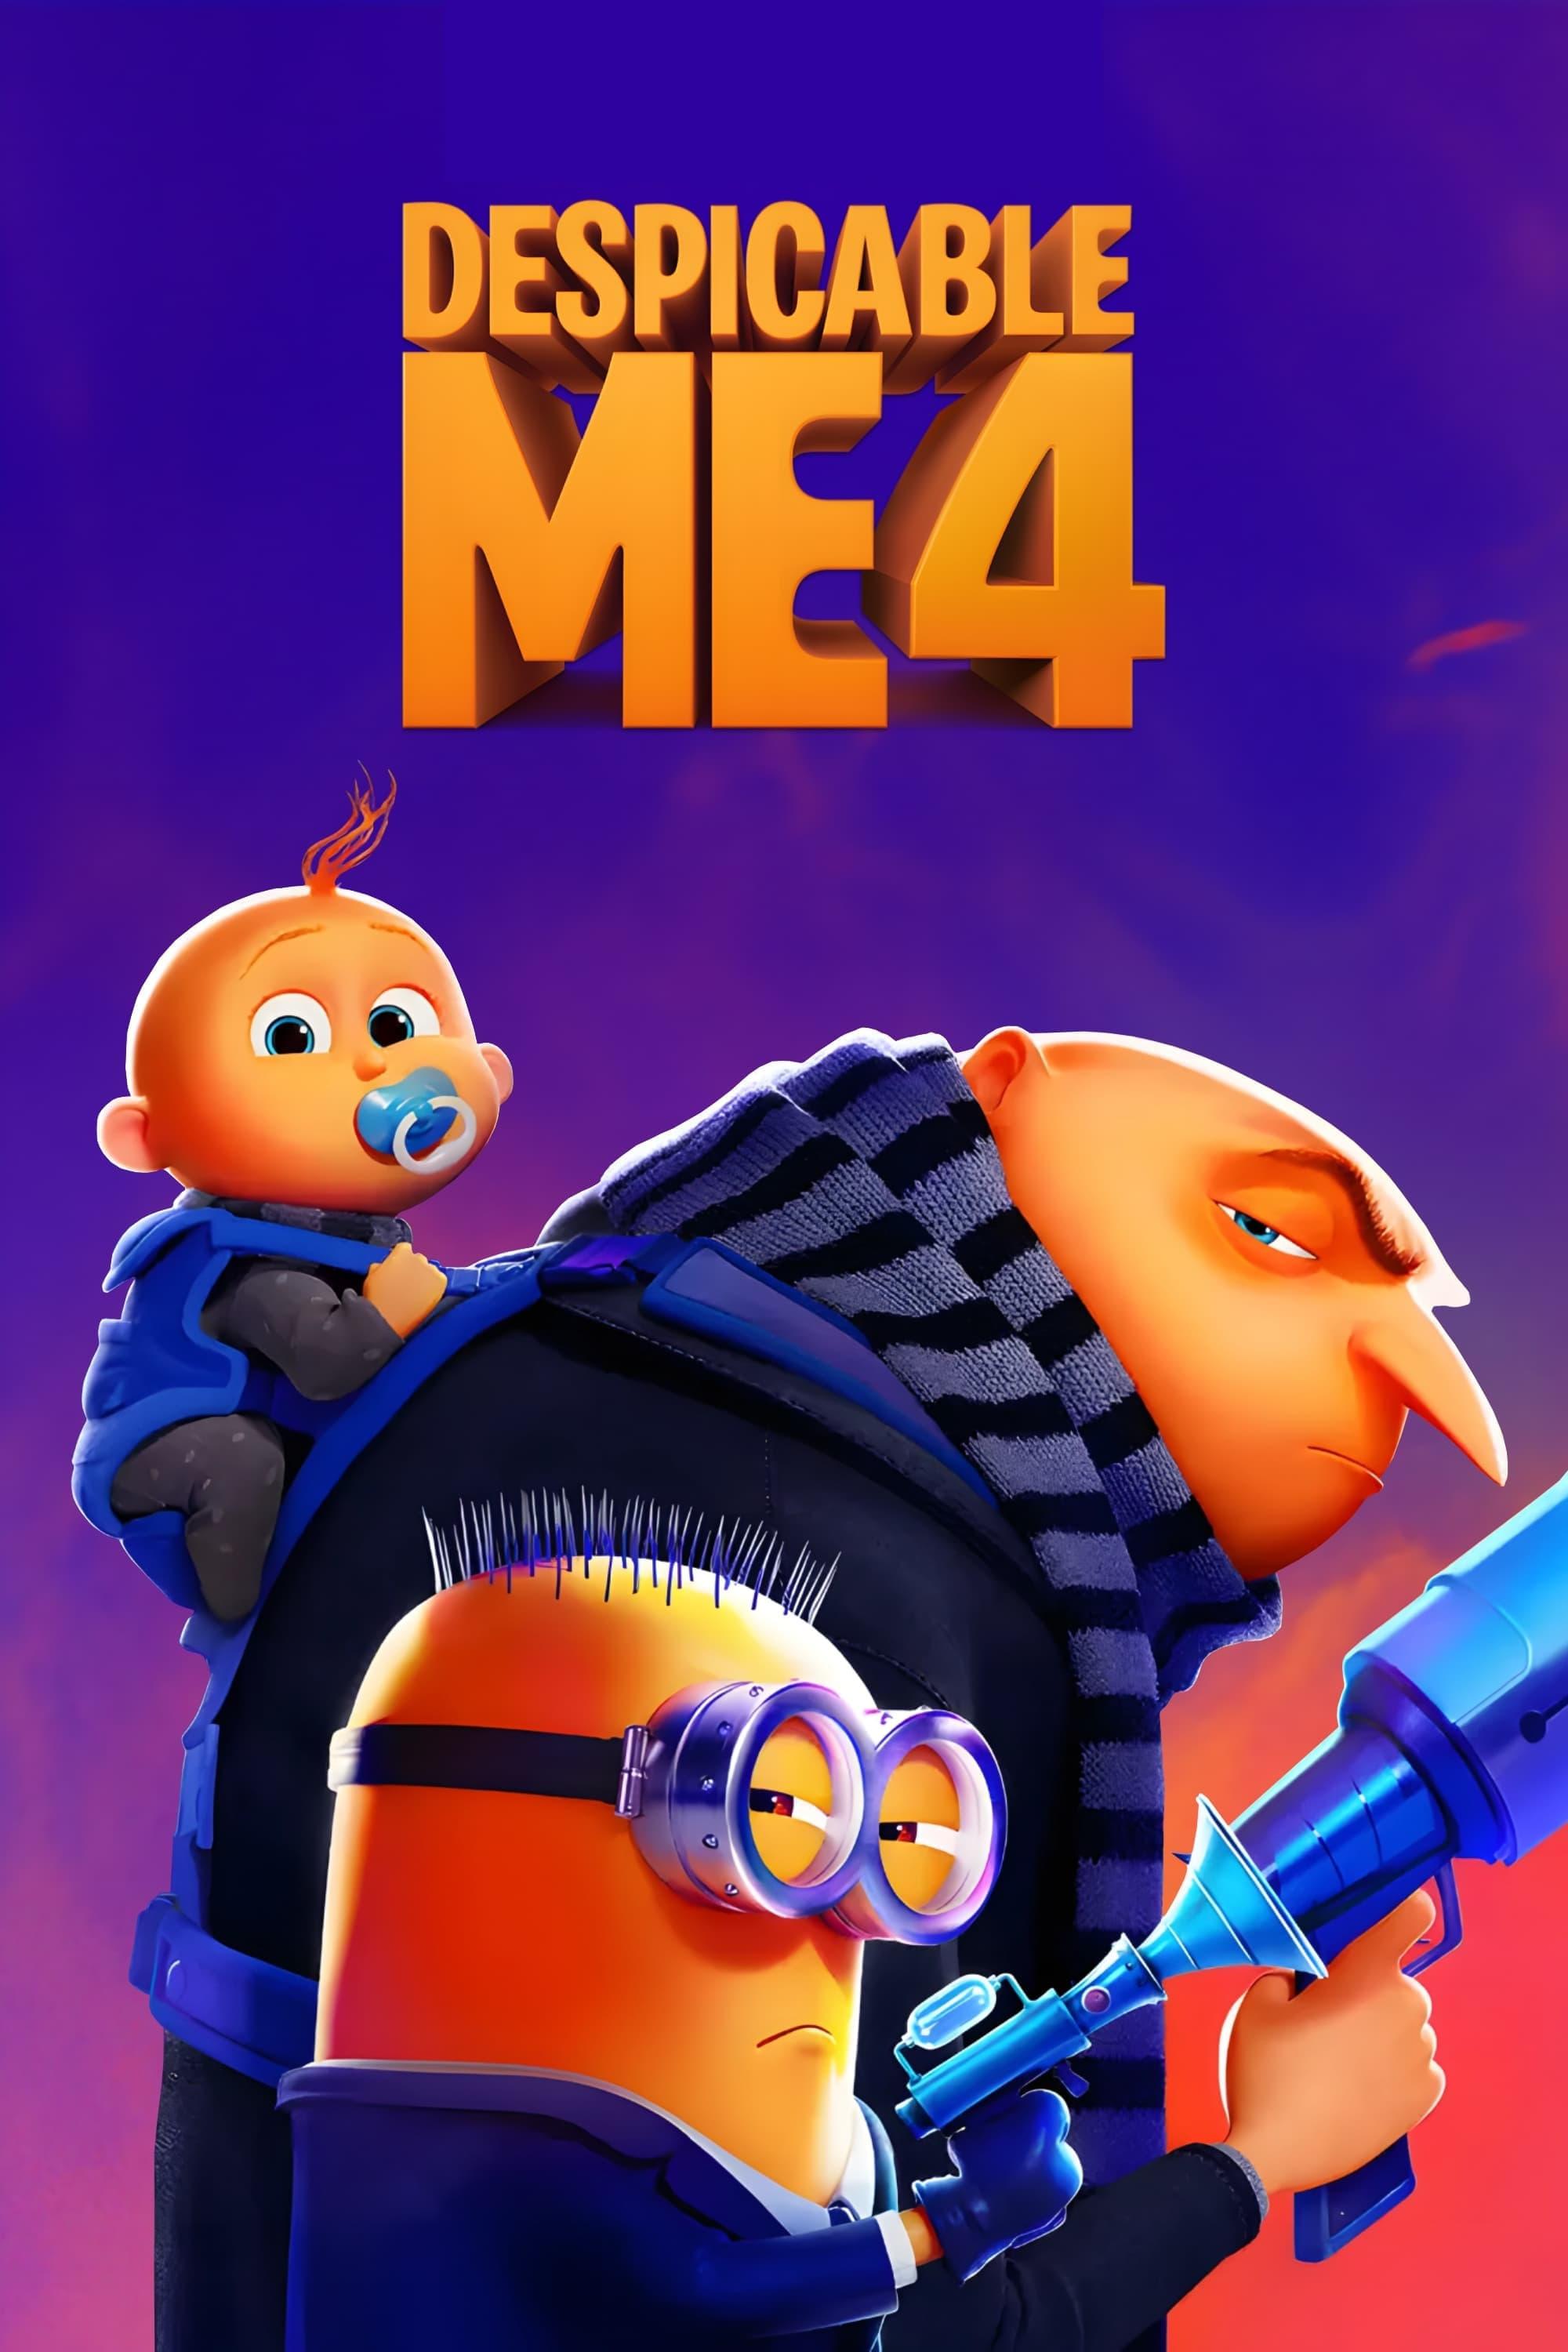 Movie poster of "Despicable Me 4"